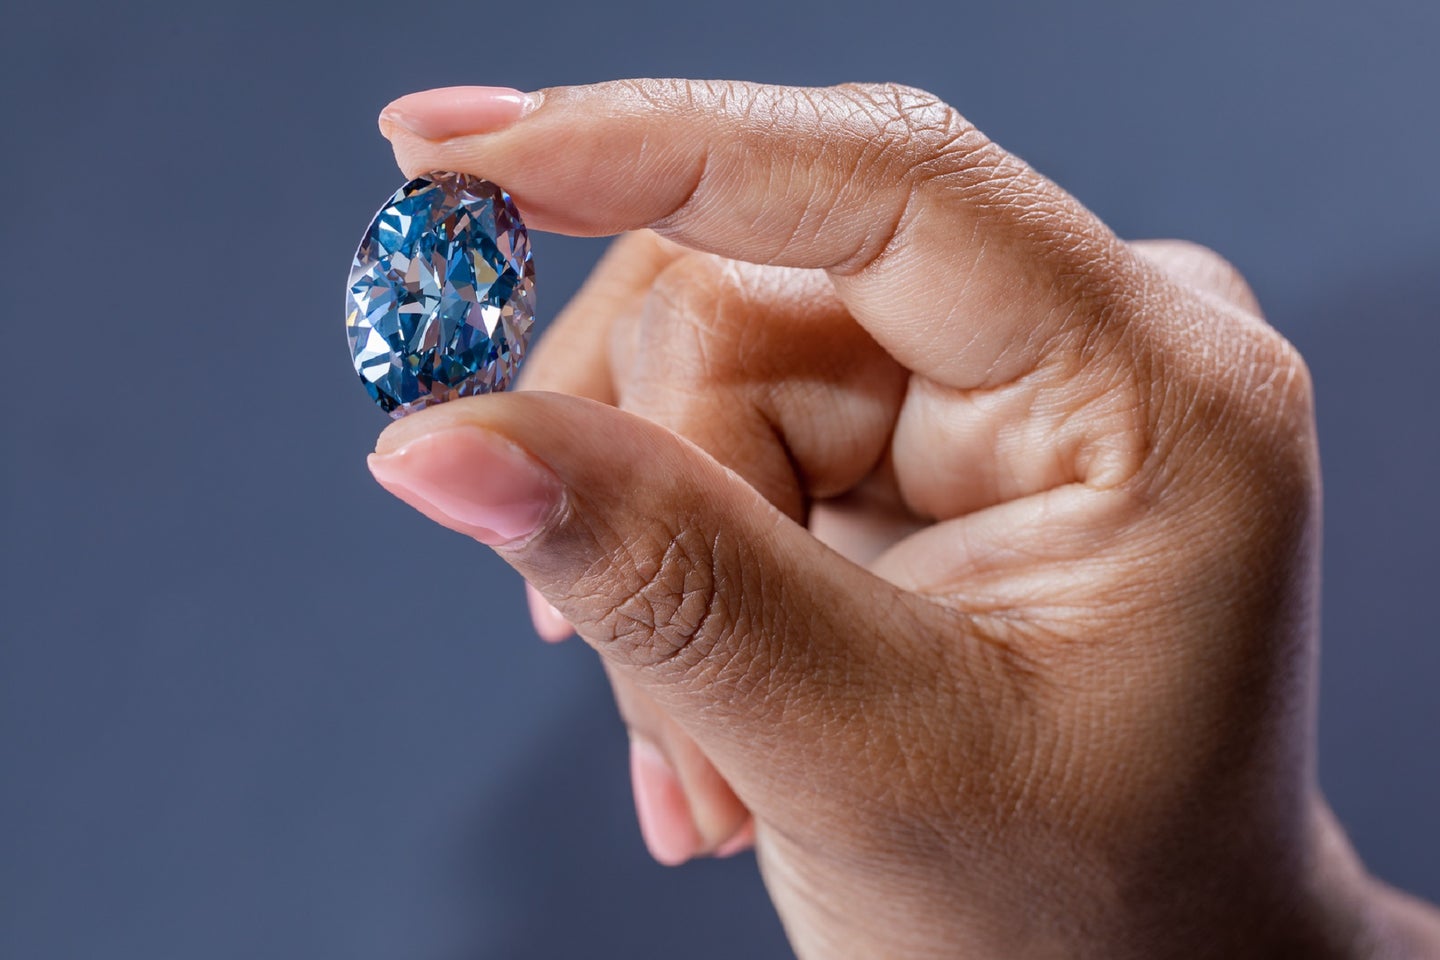 Okavango Blue Diamond filled with boron in a manicured hand on a gray background